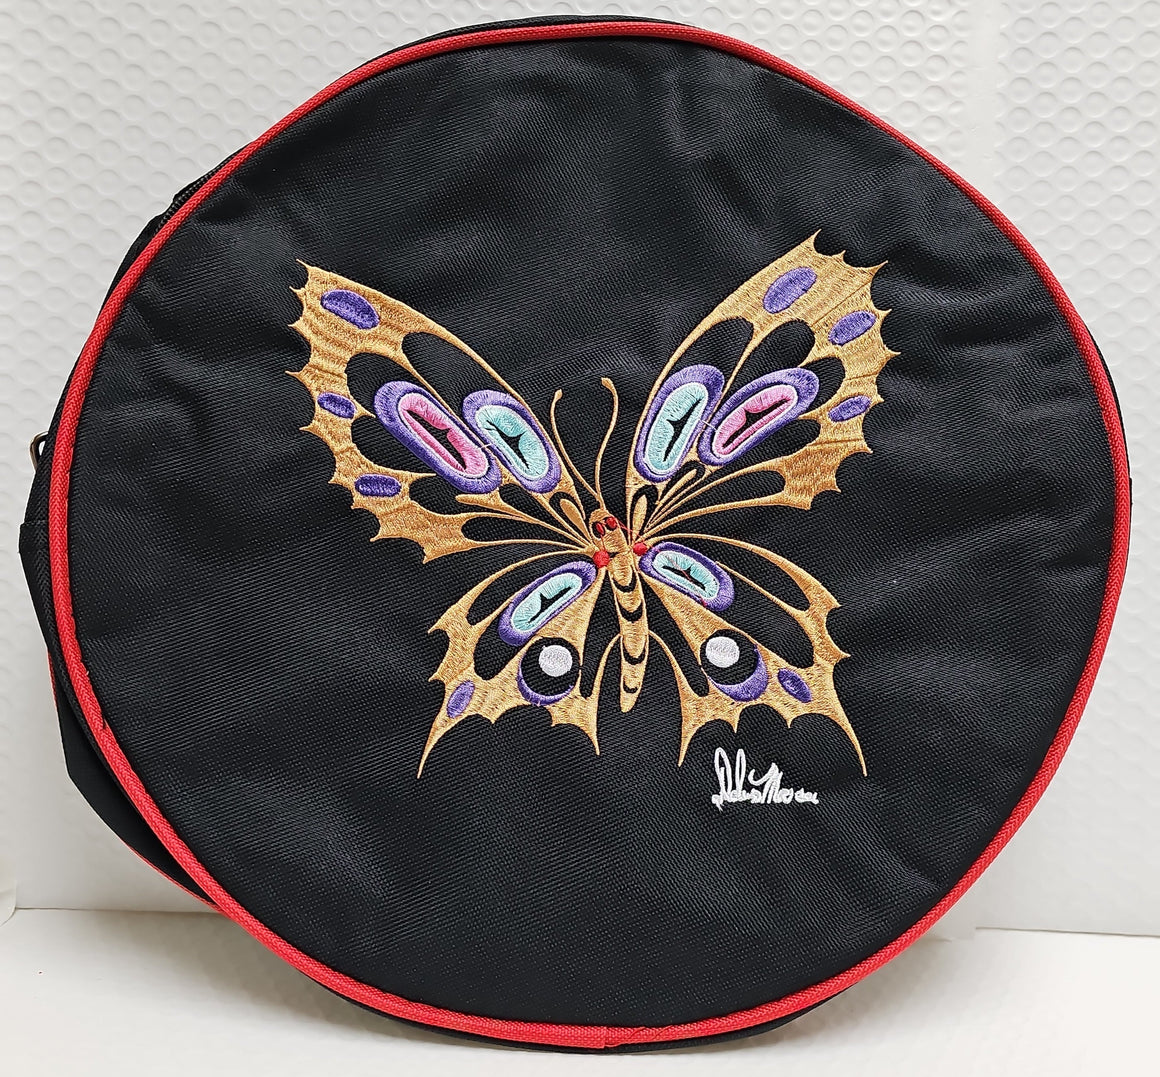 Butterfly 12" Drum Bag